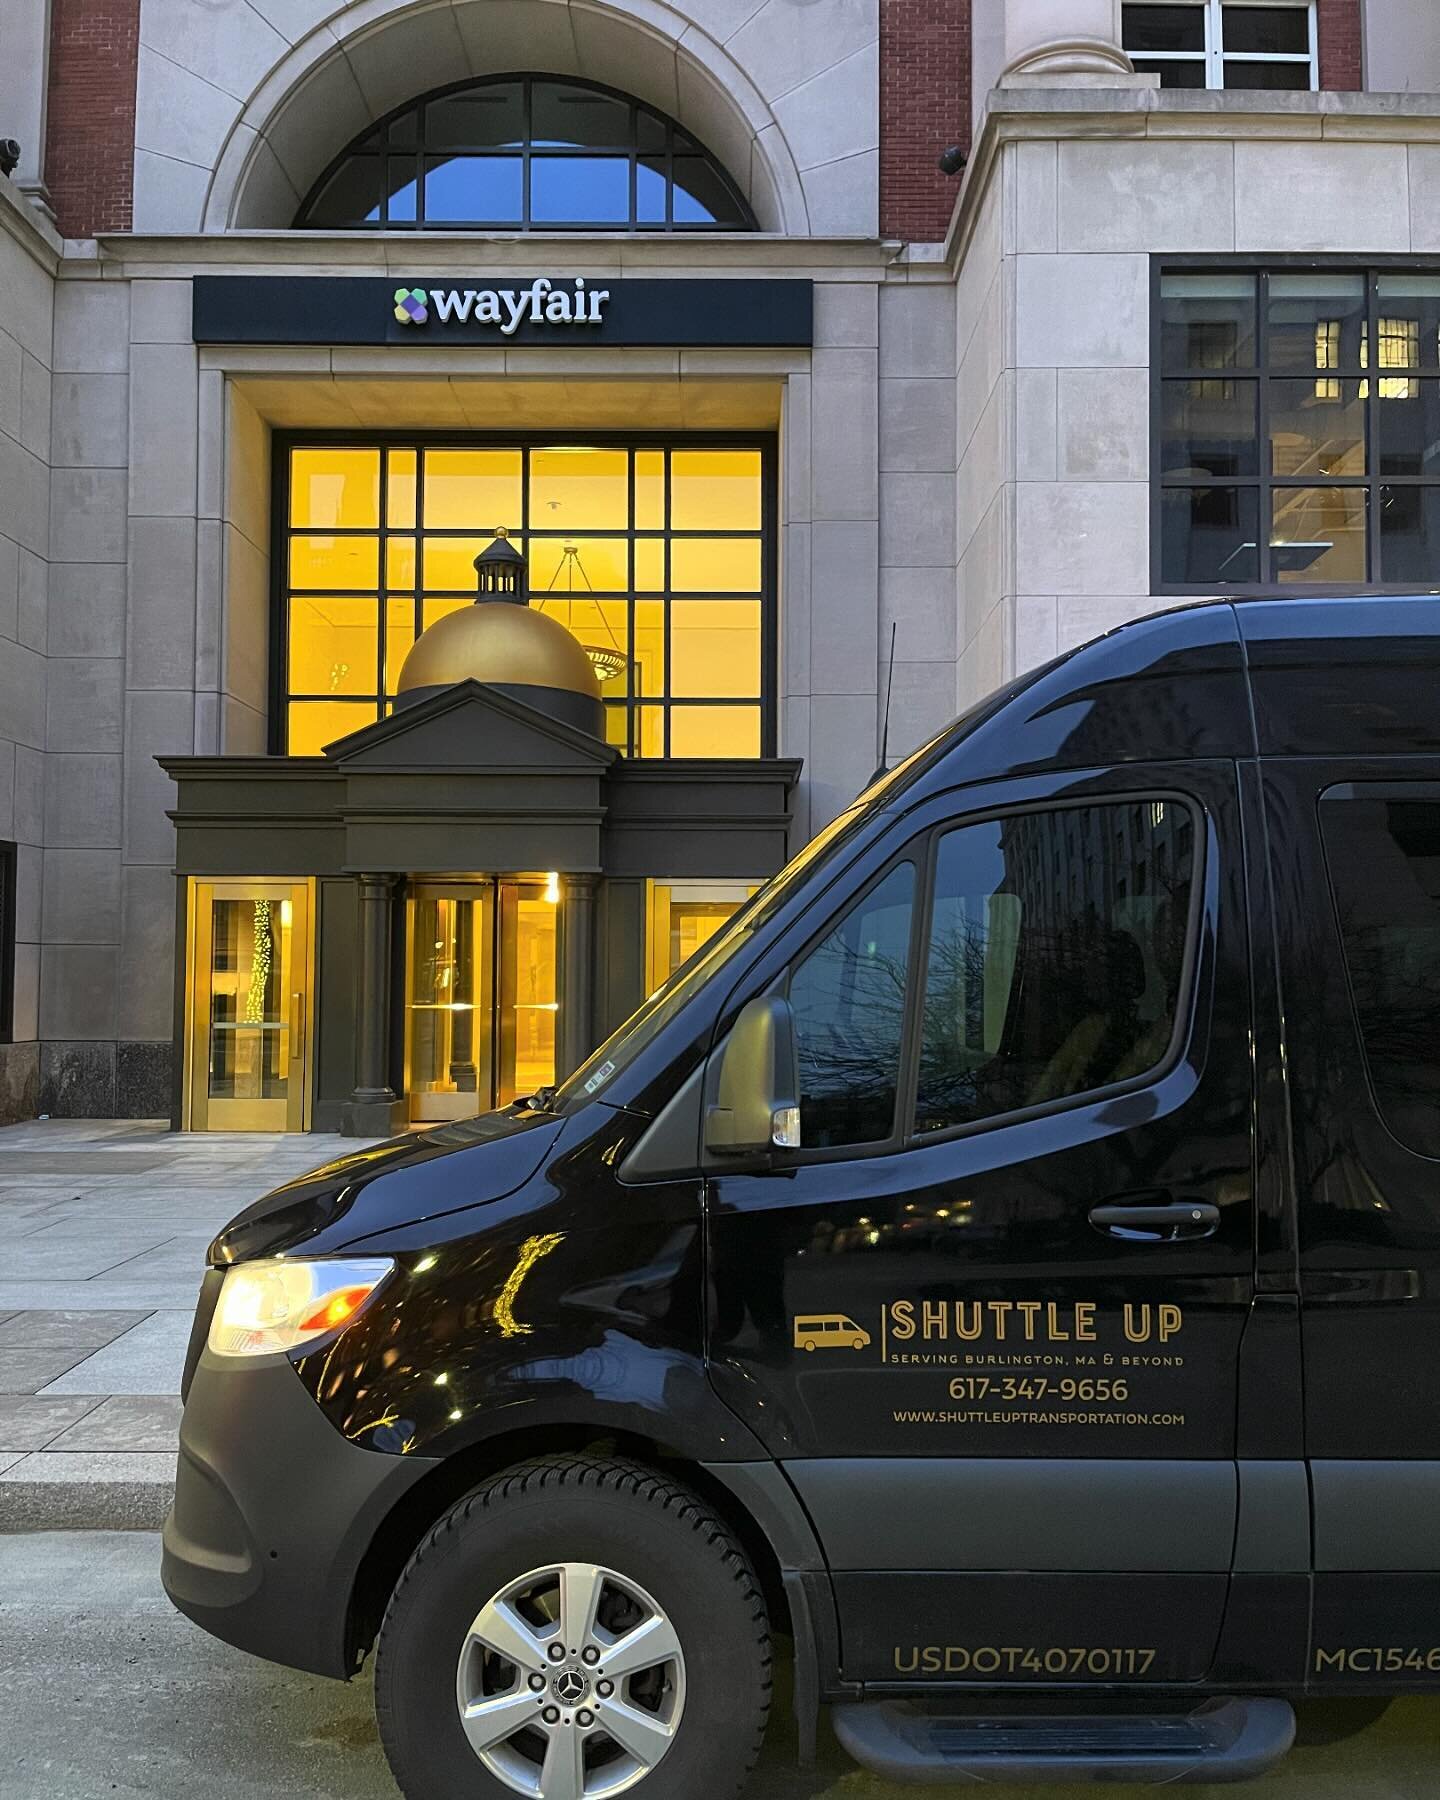 Good morning Boston. Corporate event starting early this morning for this group of 10. #shuttleuptransportation #corporateevents #boston